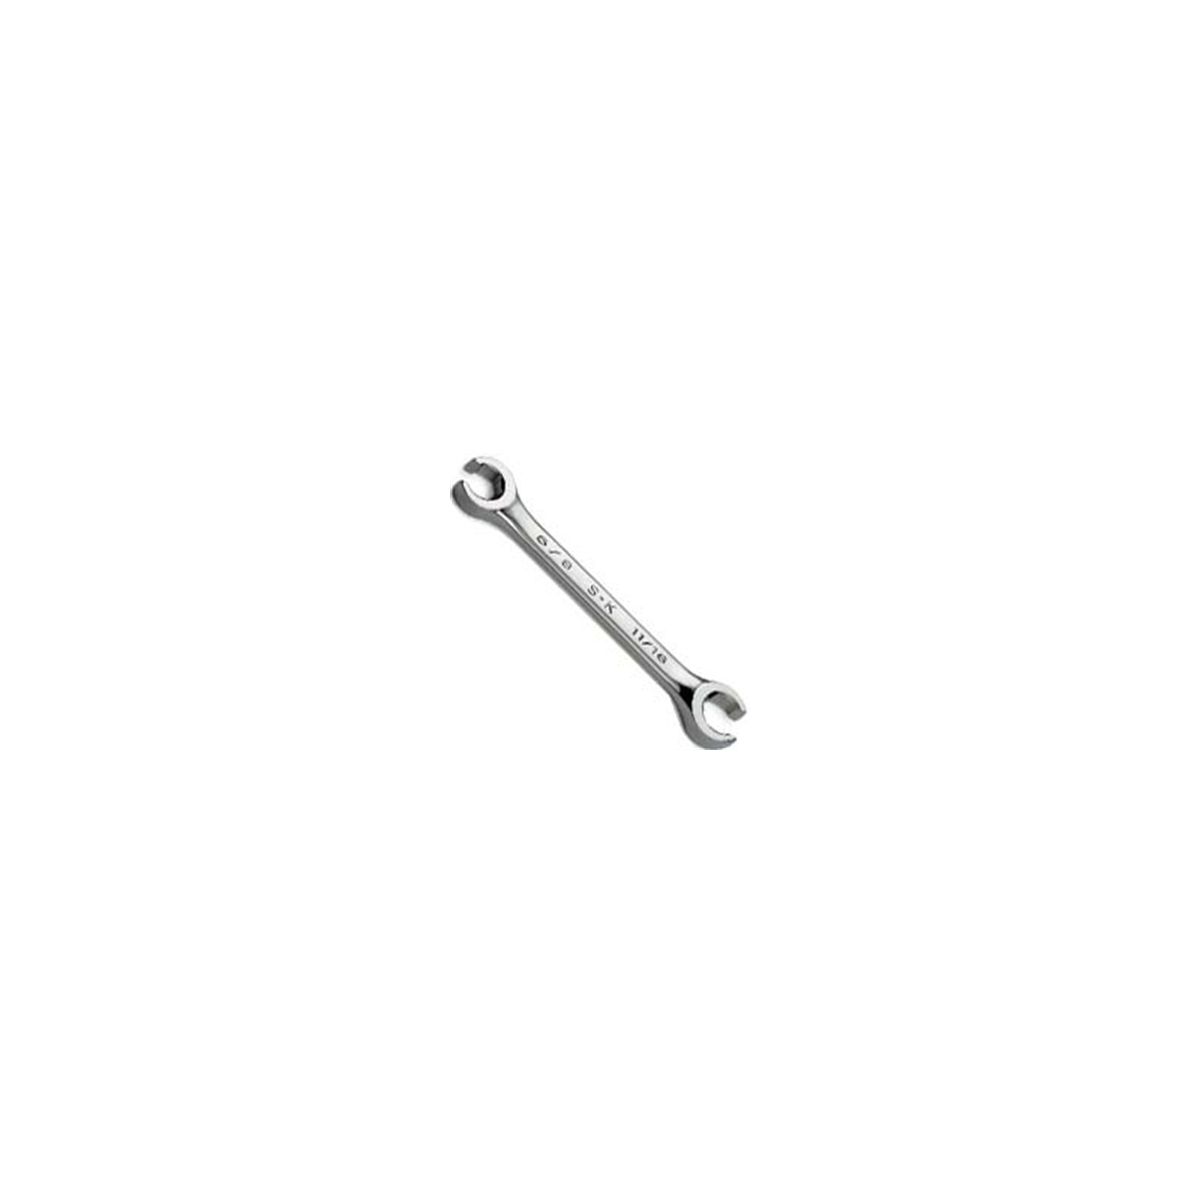 SuperKrome(R) 6-Pt Metric Flare Nut Wrench - 19mm x 21mm